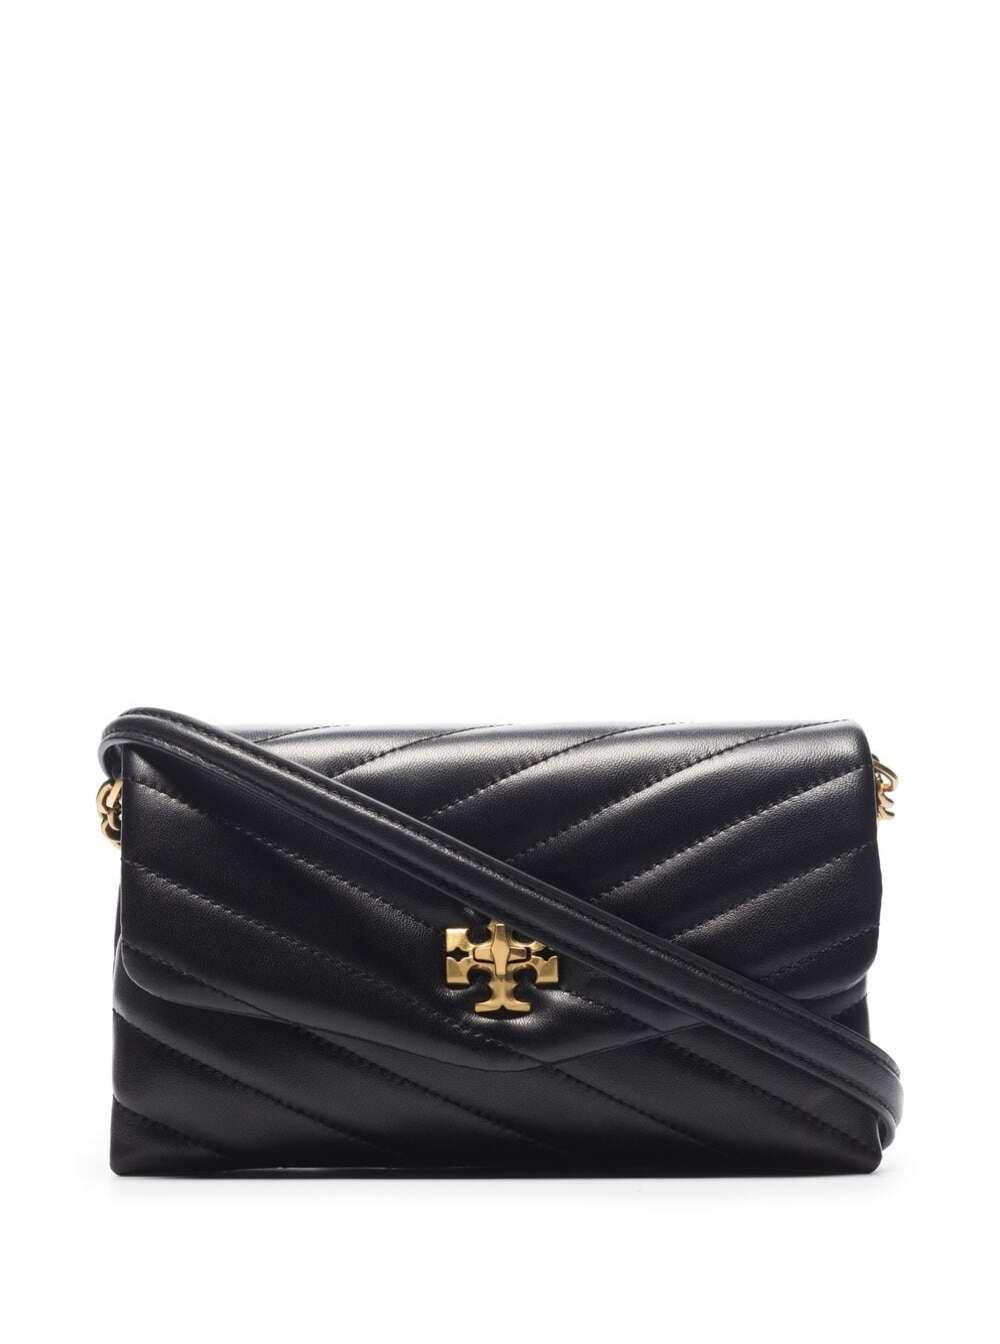 Tory Burch Kira Black Chain Wallet In Chevron-quilted Leather Woman